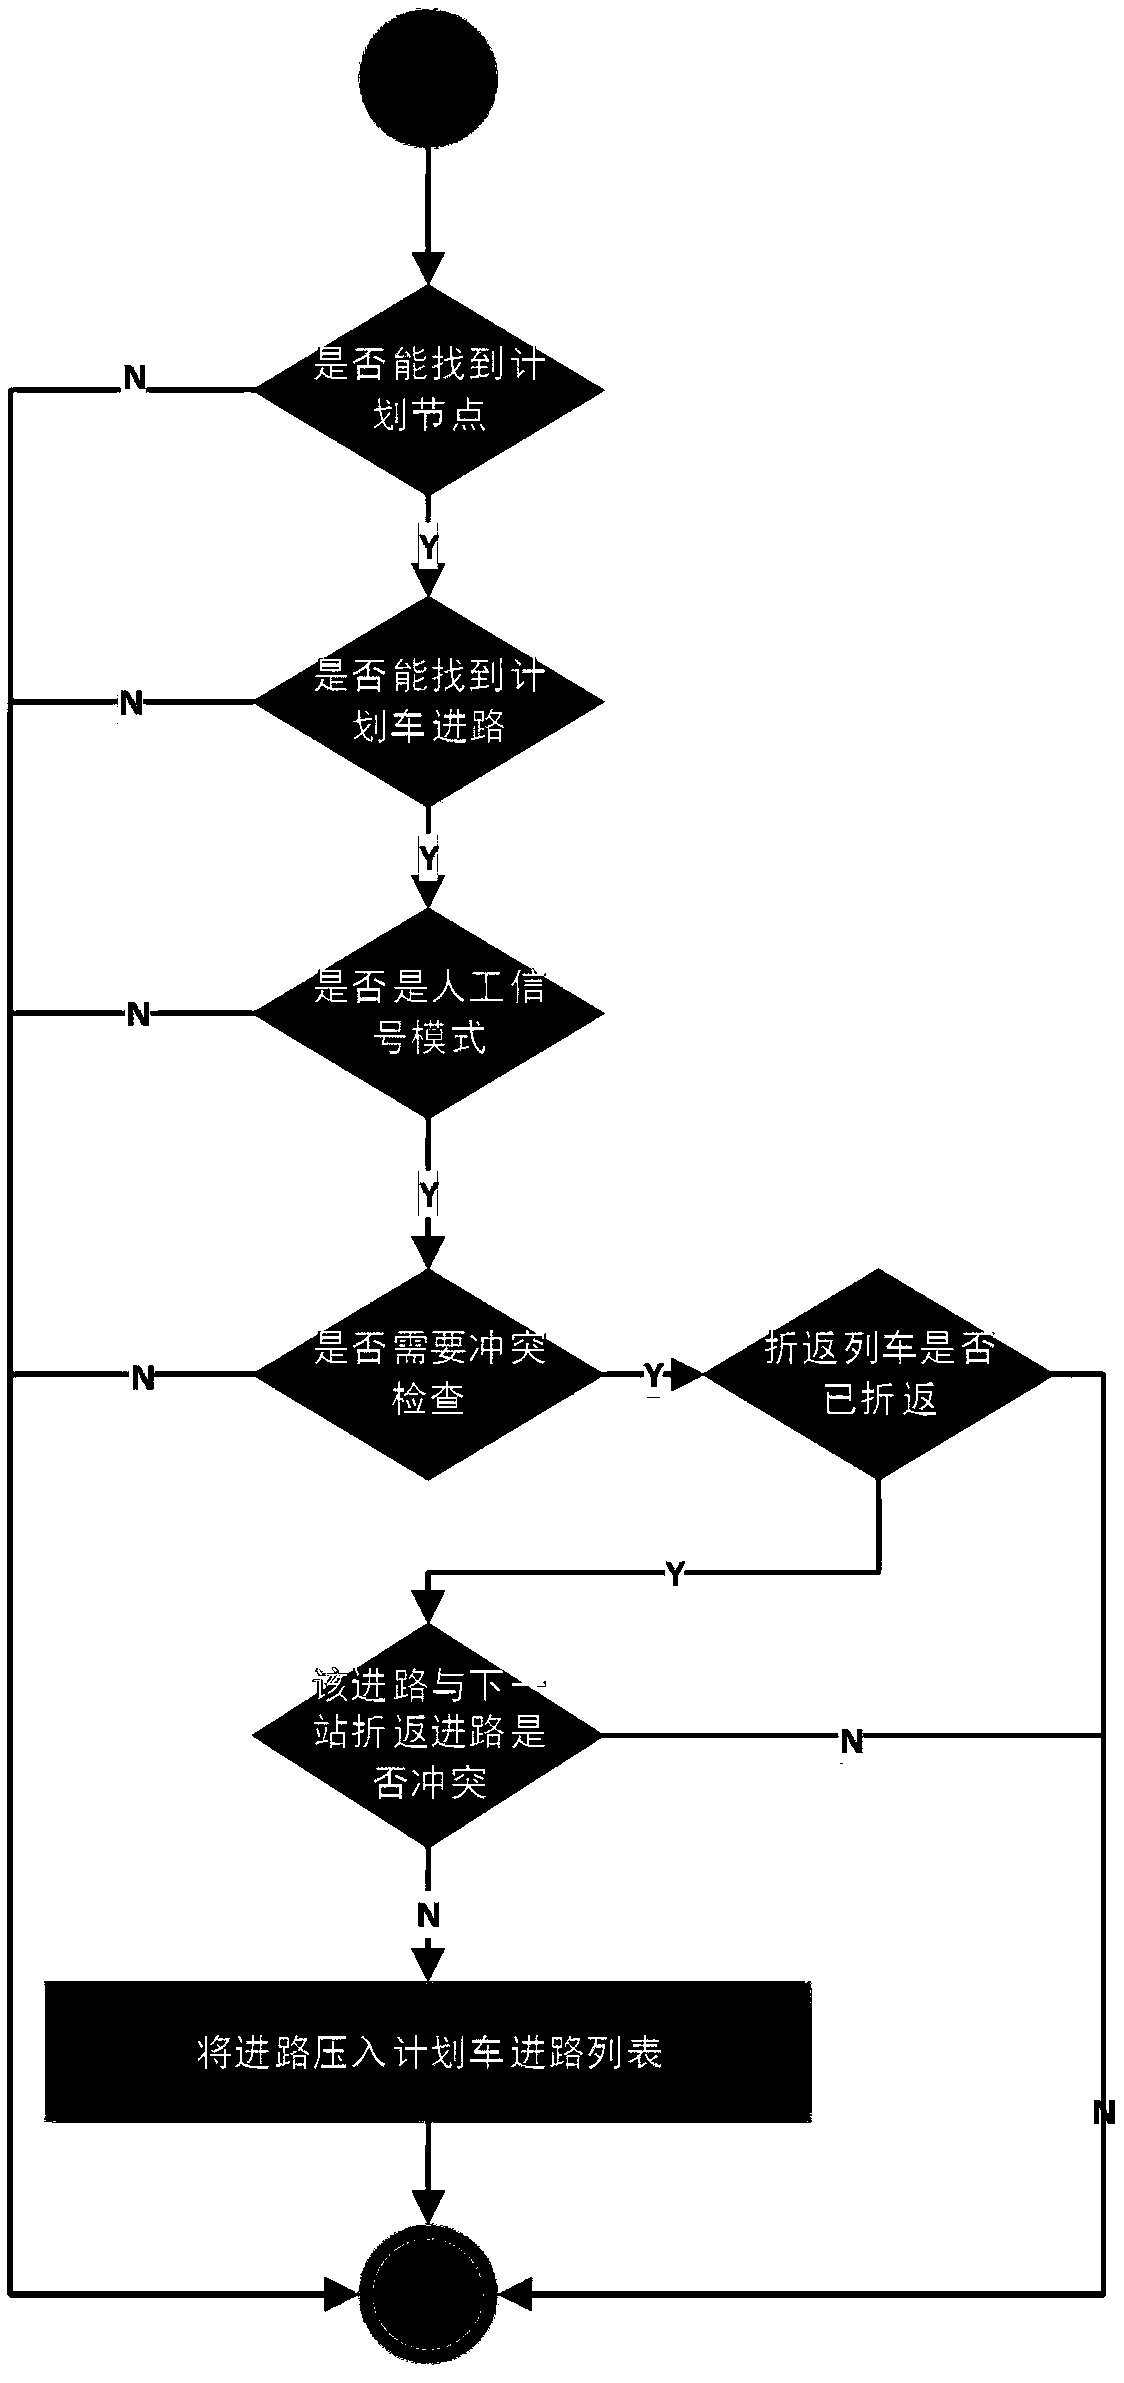 Automatic train route handling method